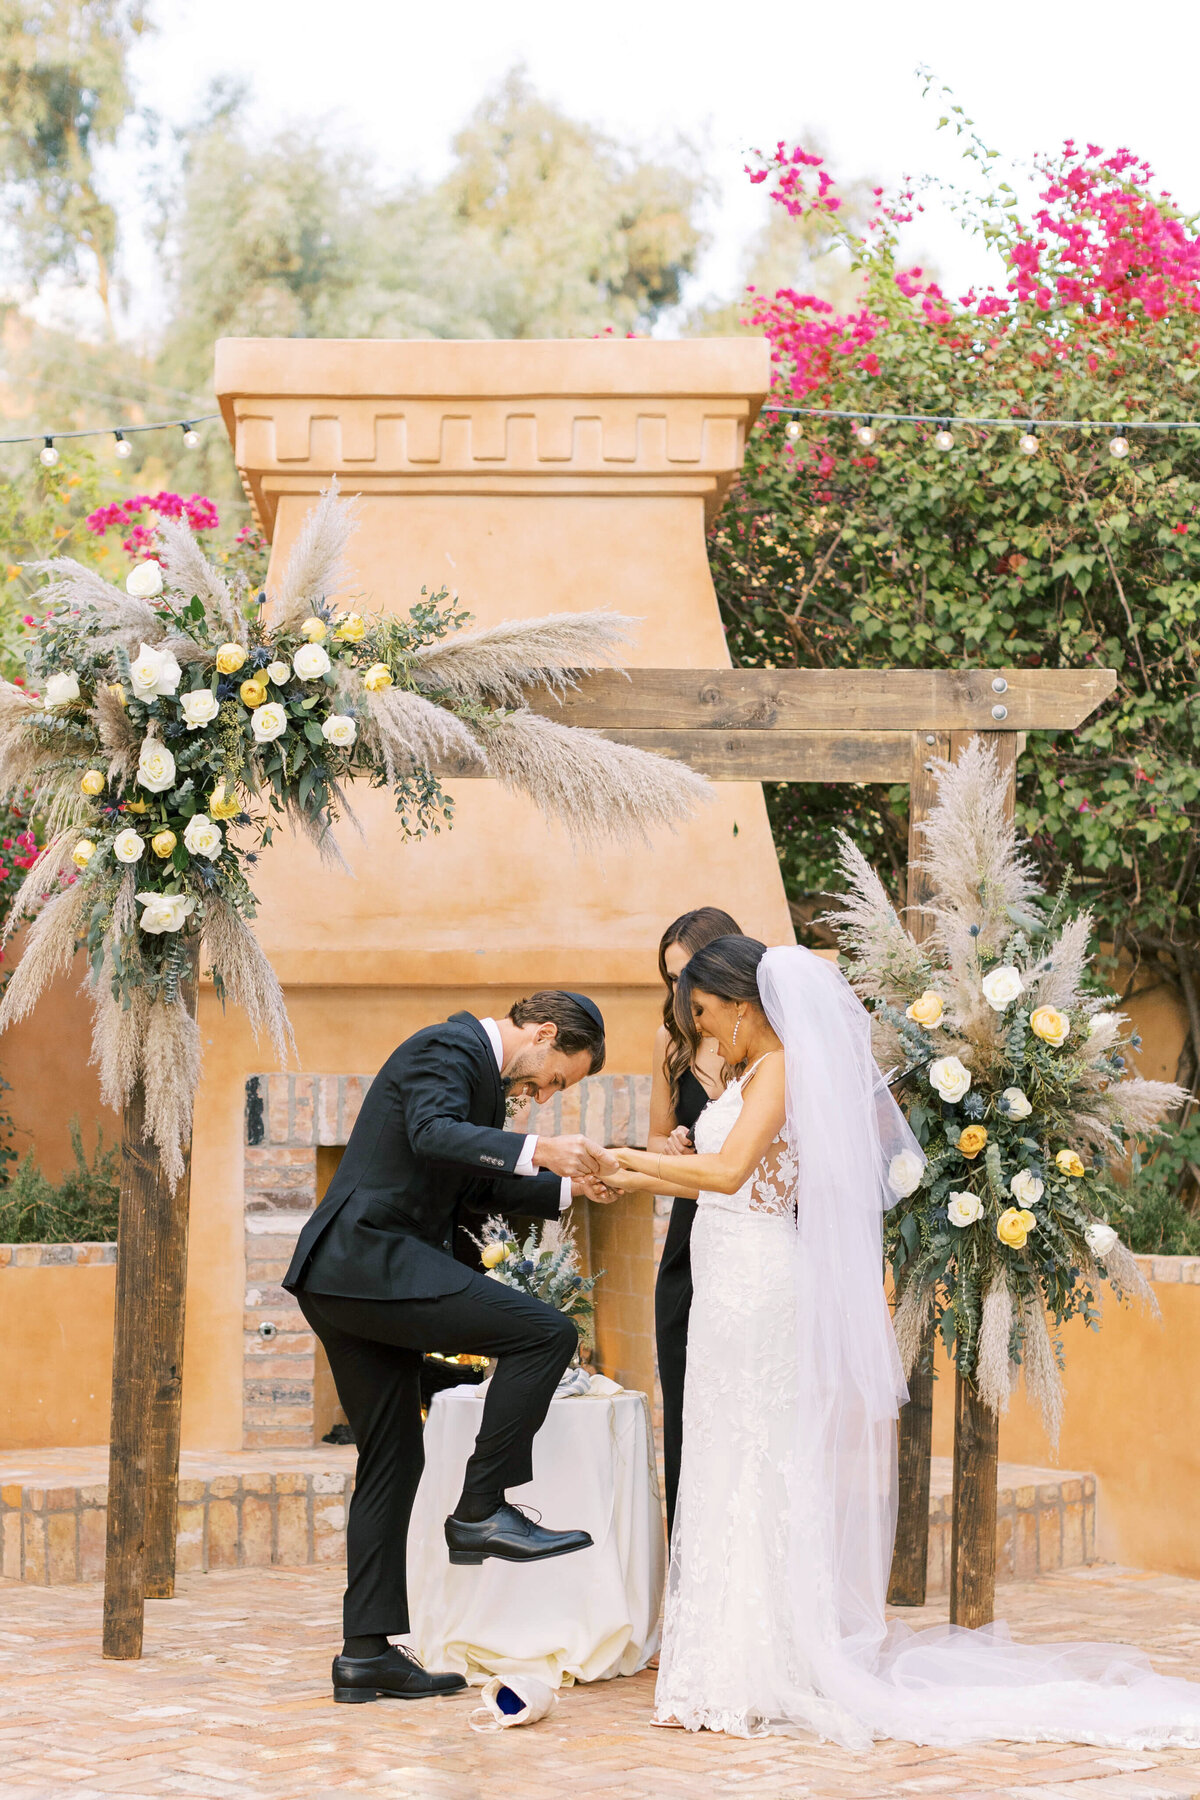 Bride and groom holding hands while the groom breaks the glass carefully wrapped with white cloth at this southern california wedding